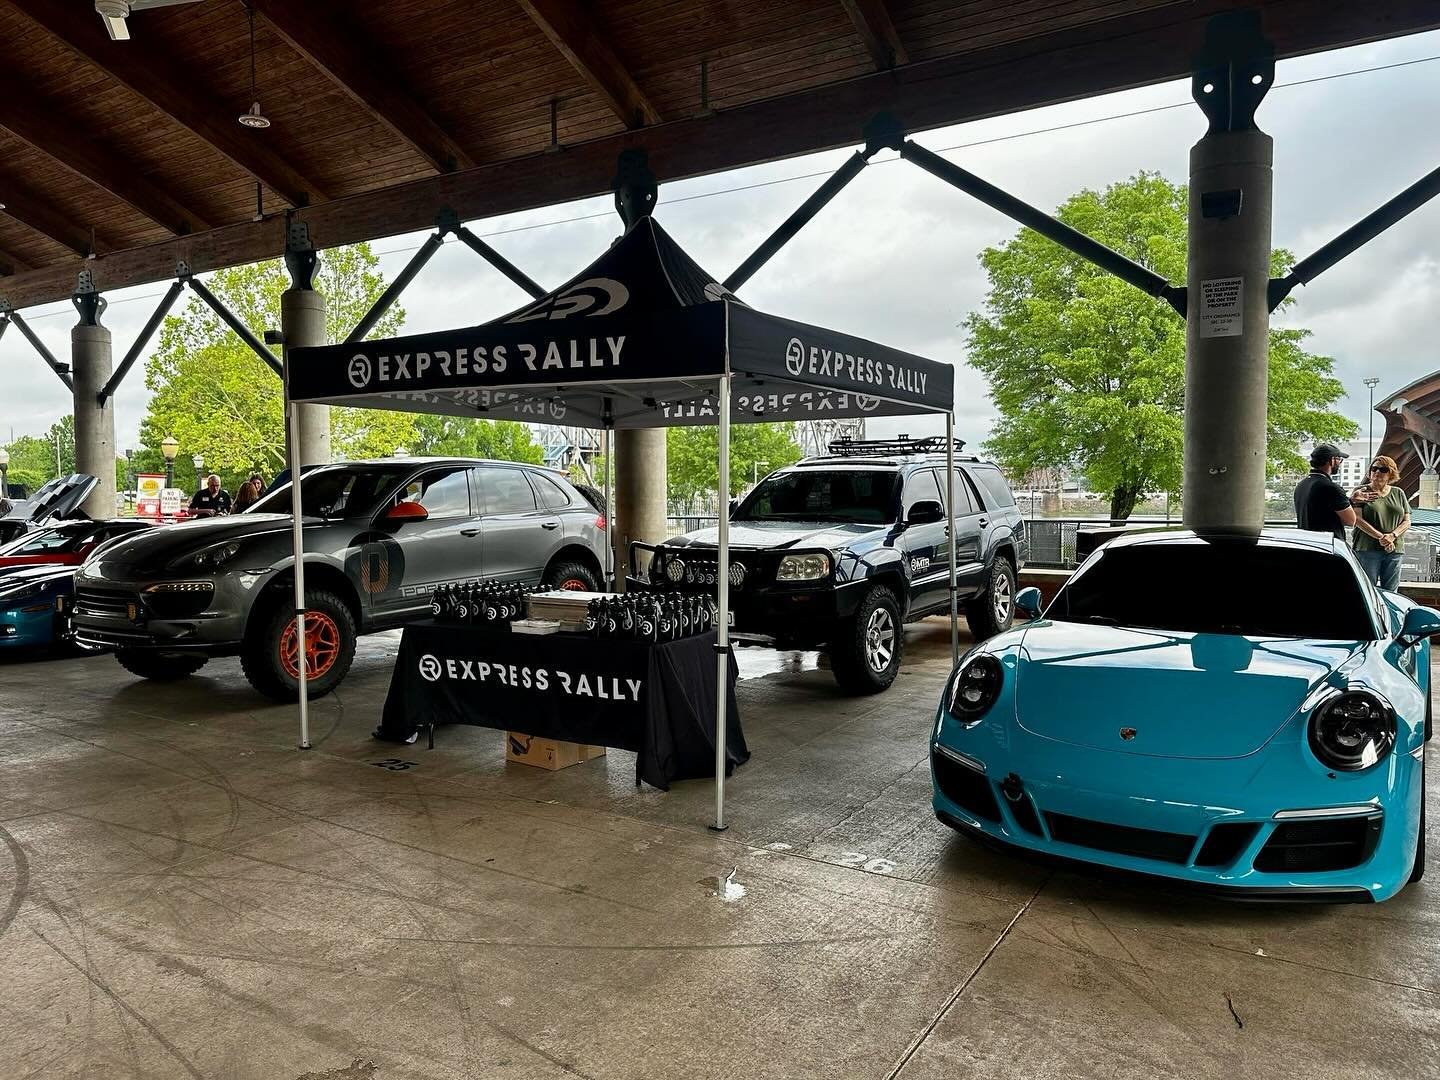 If you are at Rivermarket Cars &amp; Coffee this morning make sure you stop by the ER booth to say hi and snag some swag!

#expressrally #carsandcoffee #littlerock #littlerockarkansas #littlerockrivermarket #rivermarket #driversonly #porsche